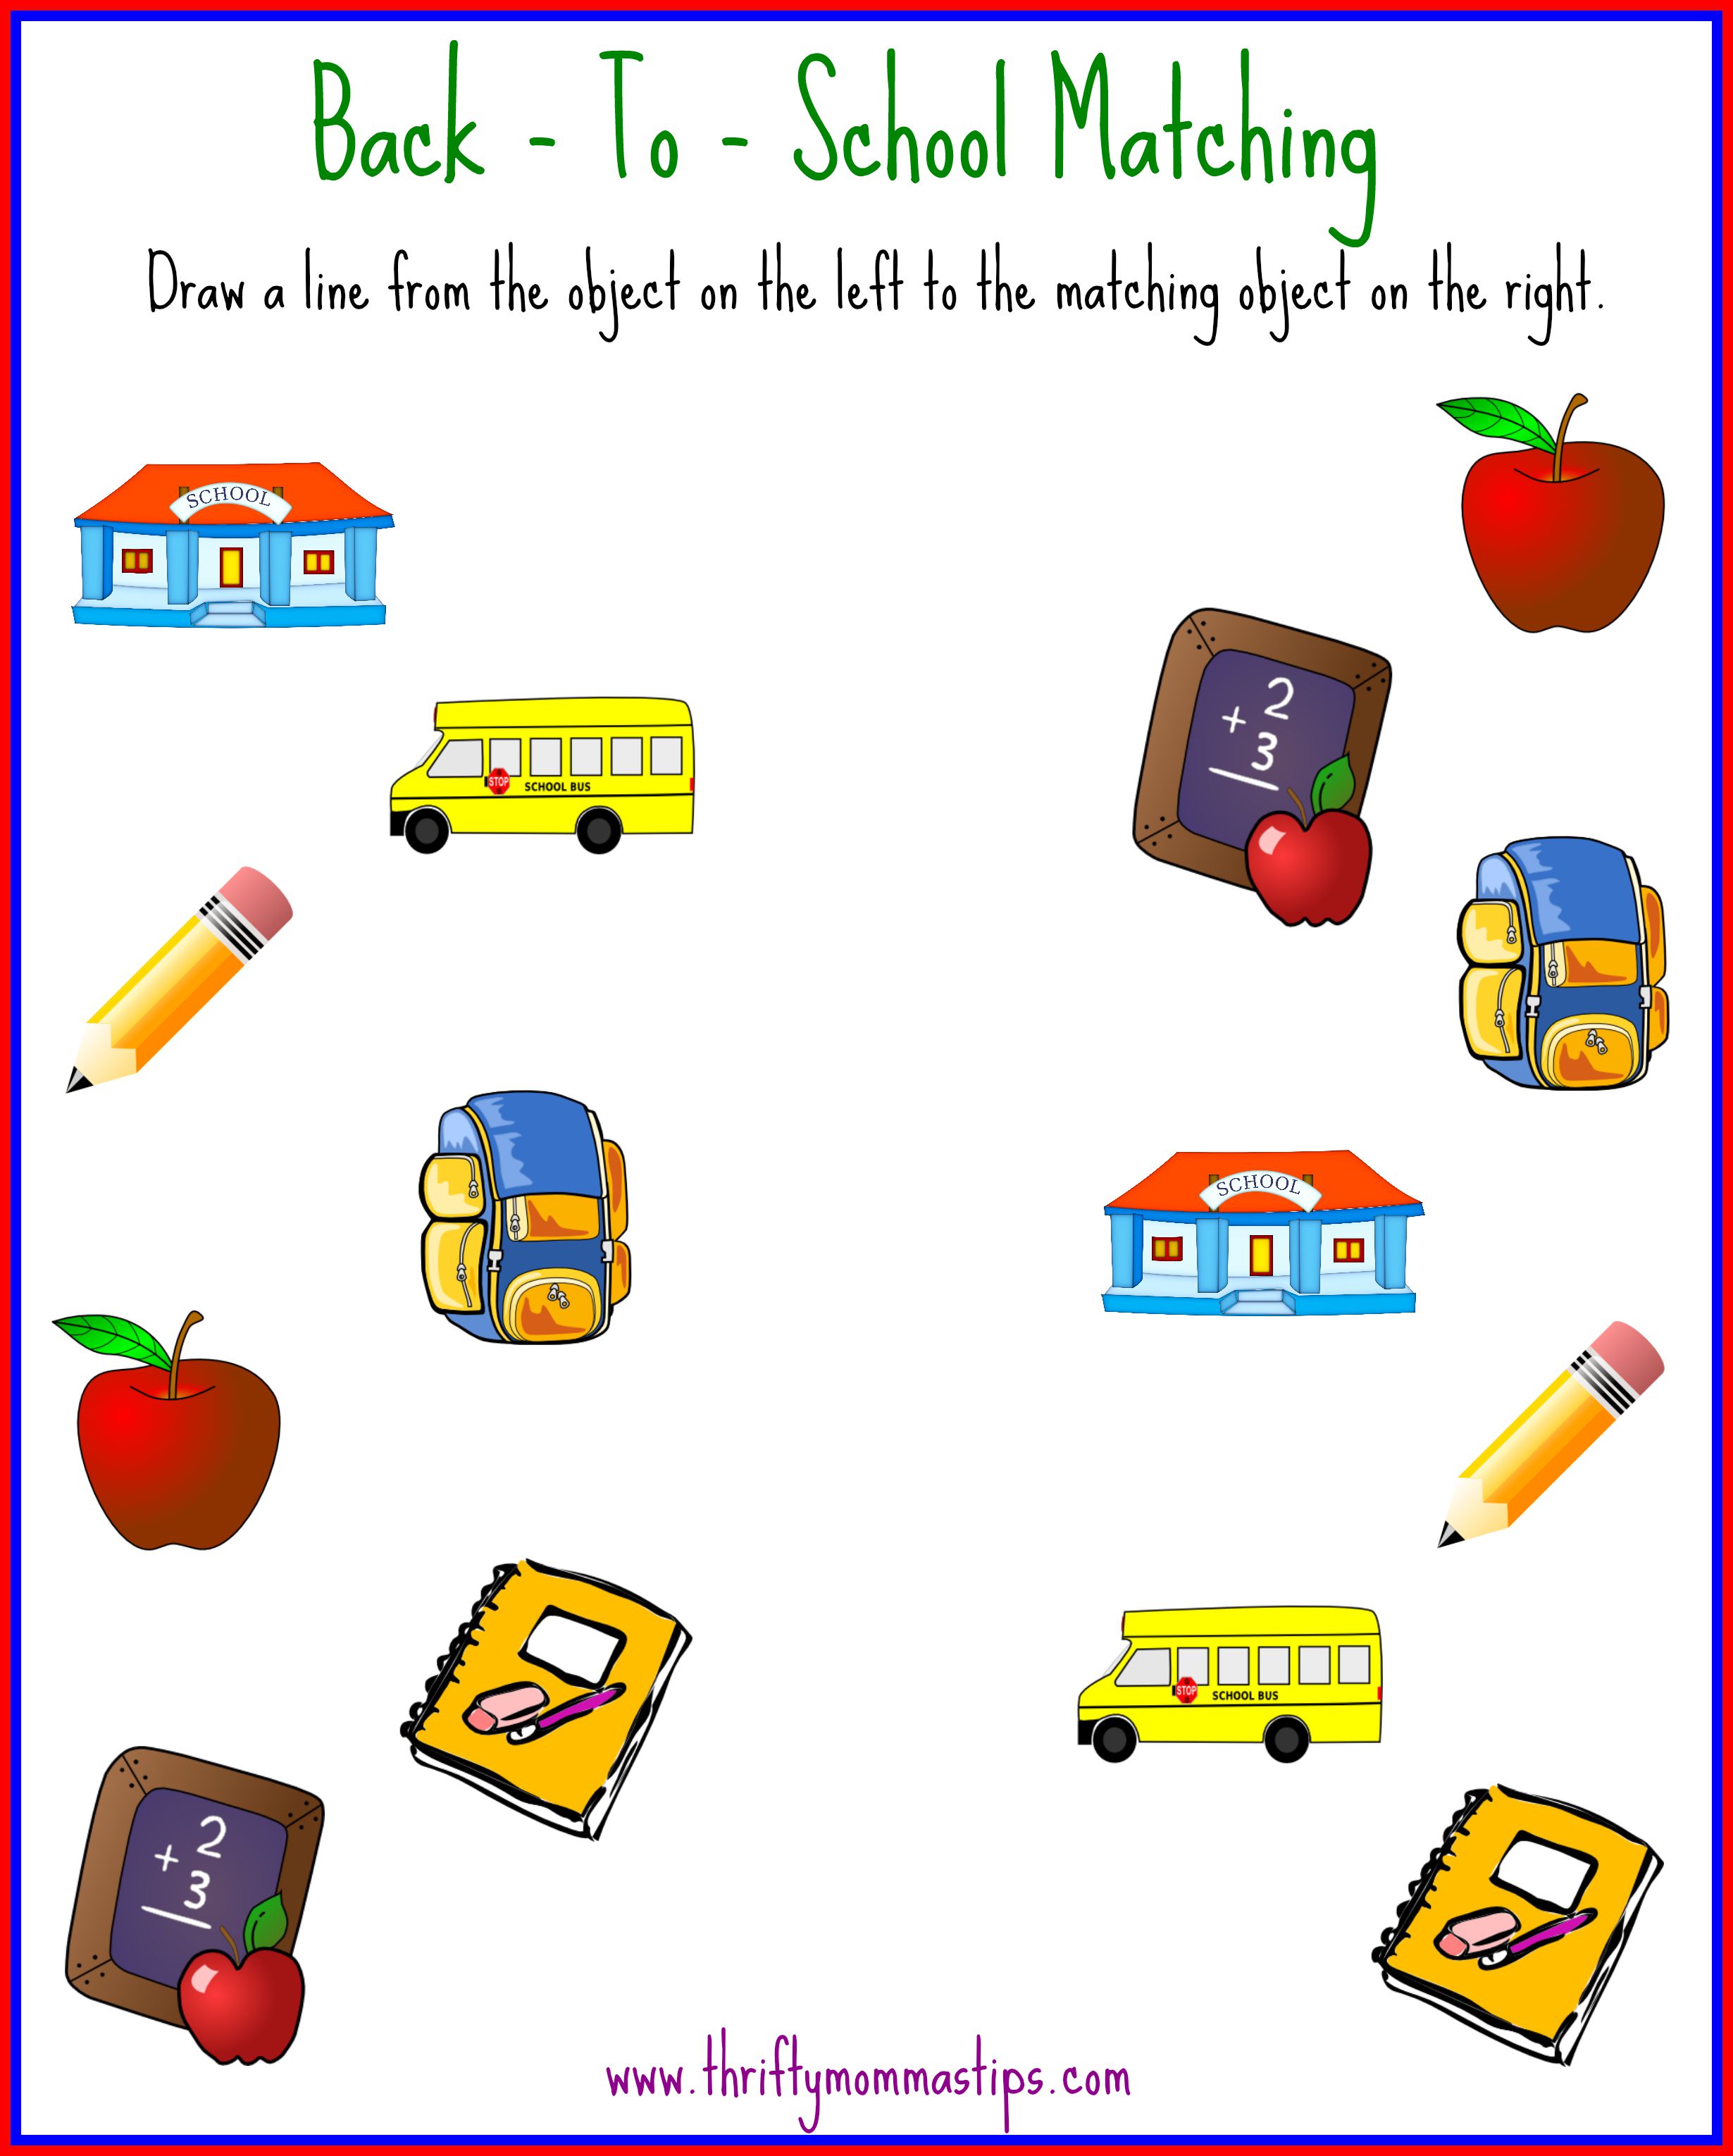 back to school matching printable